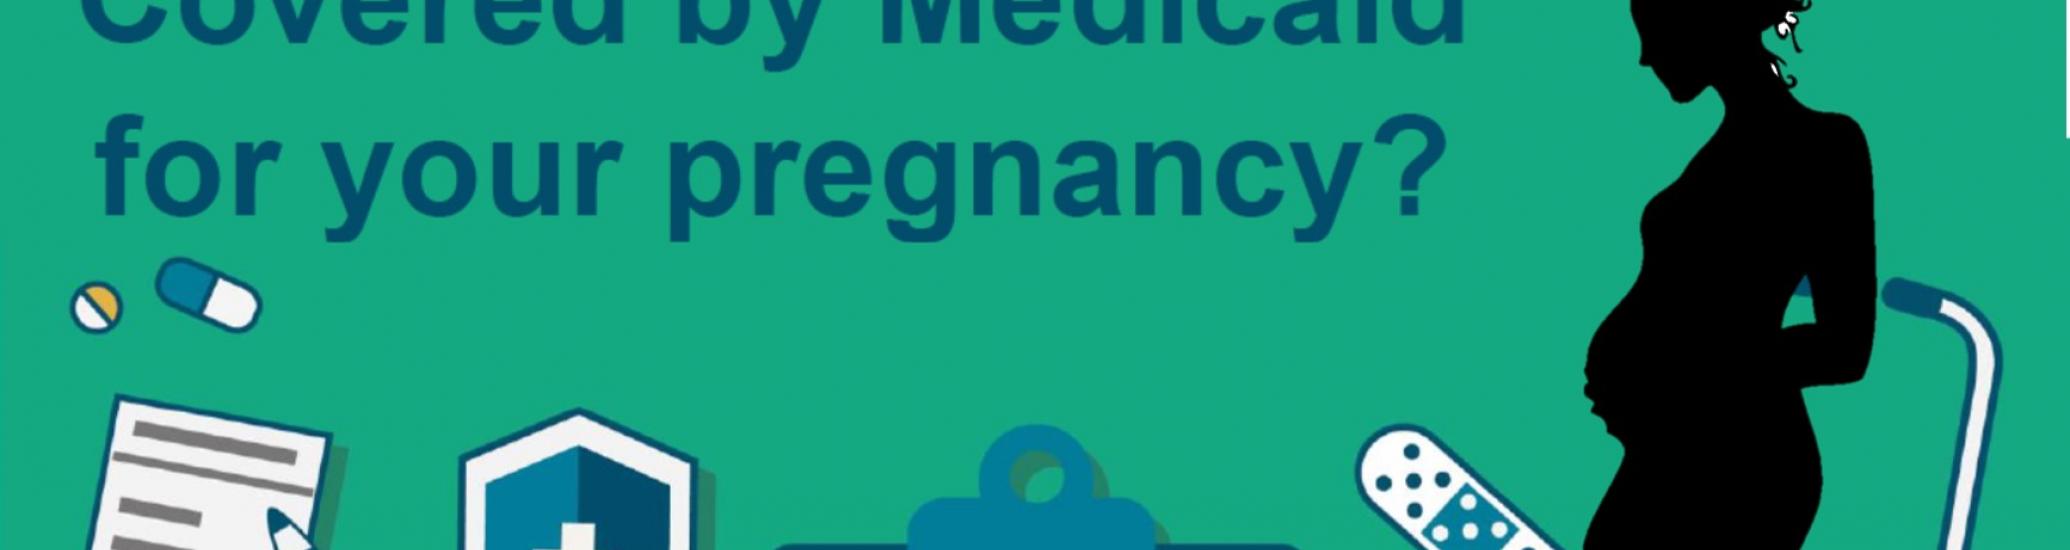 Extended Medicaid Coverage for Pregnant Women